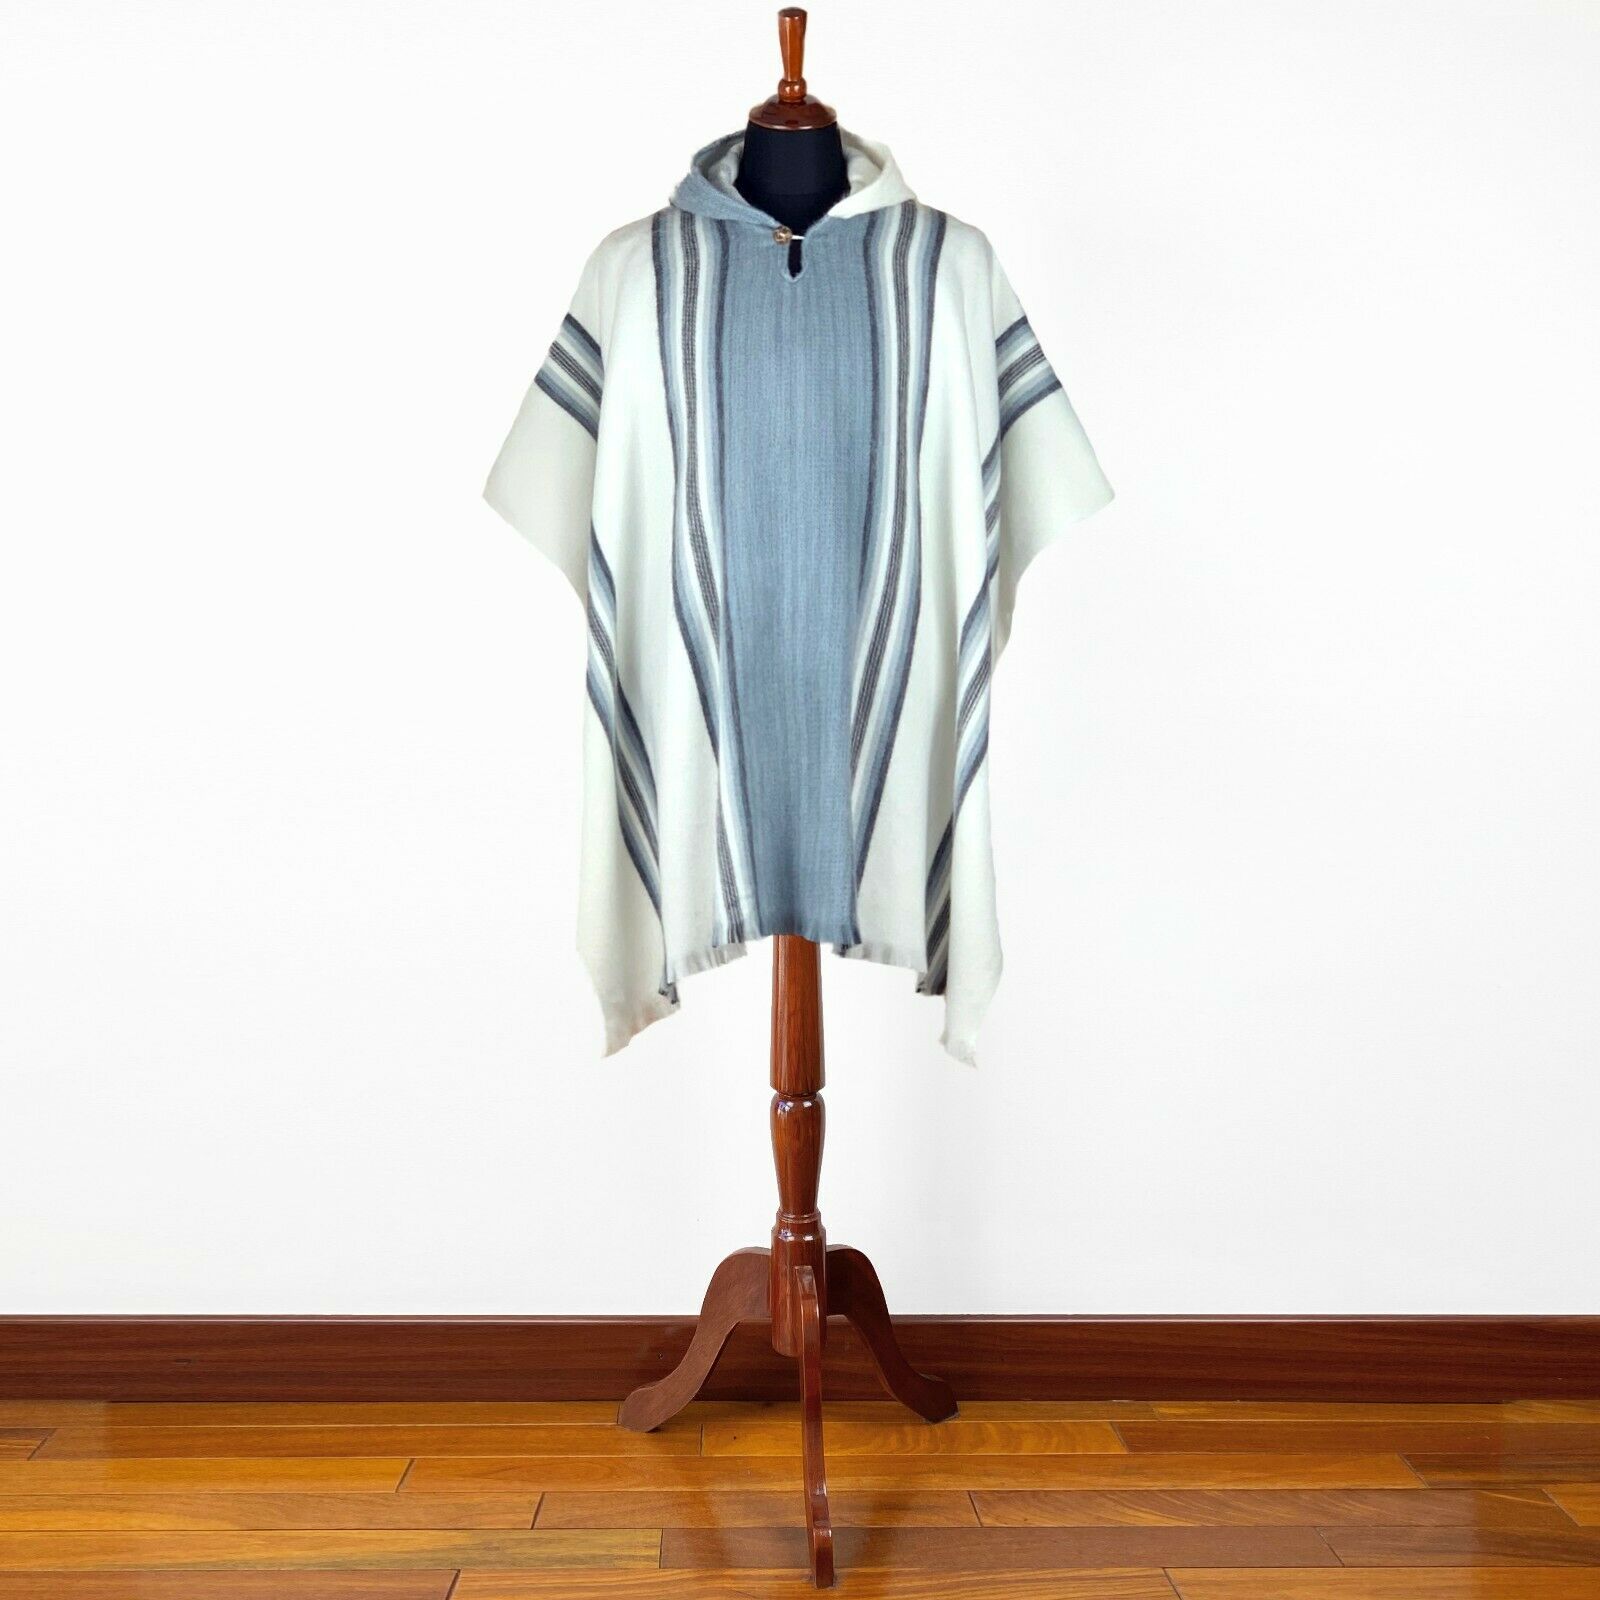 Carchipulla - Lightweight Baby Alpaca Hooded Poncho - Striped White/Gray Pattern - Unisex